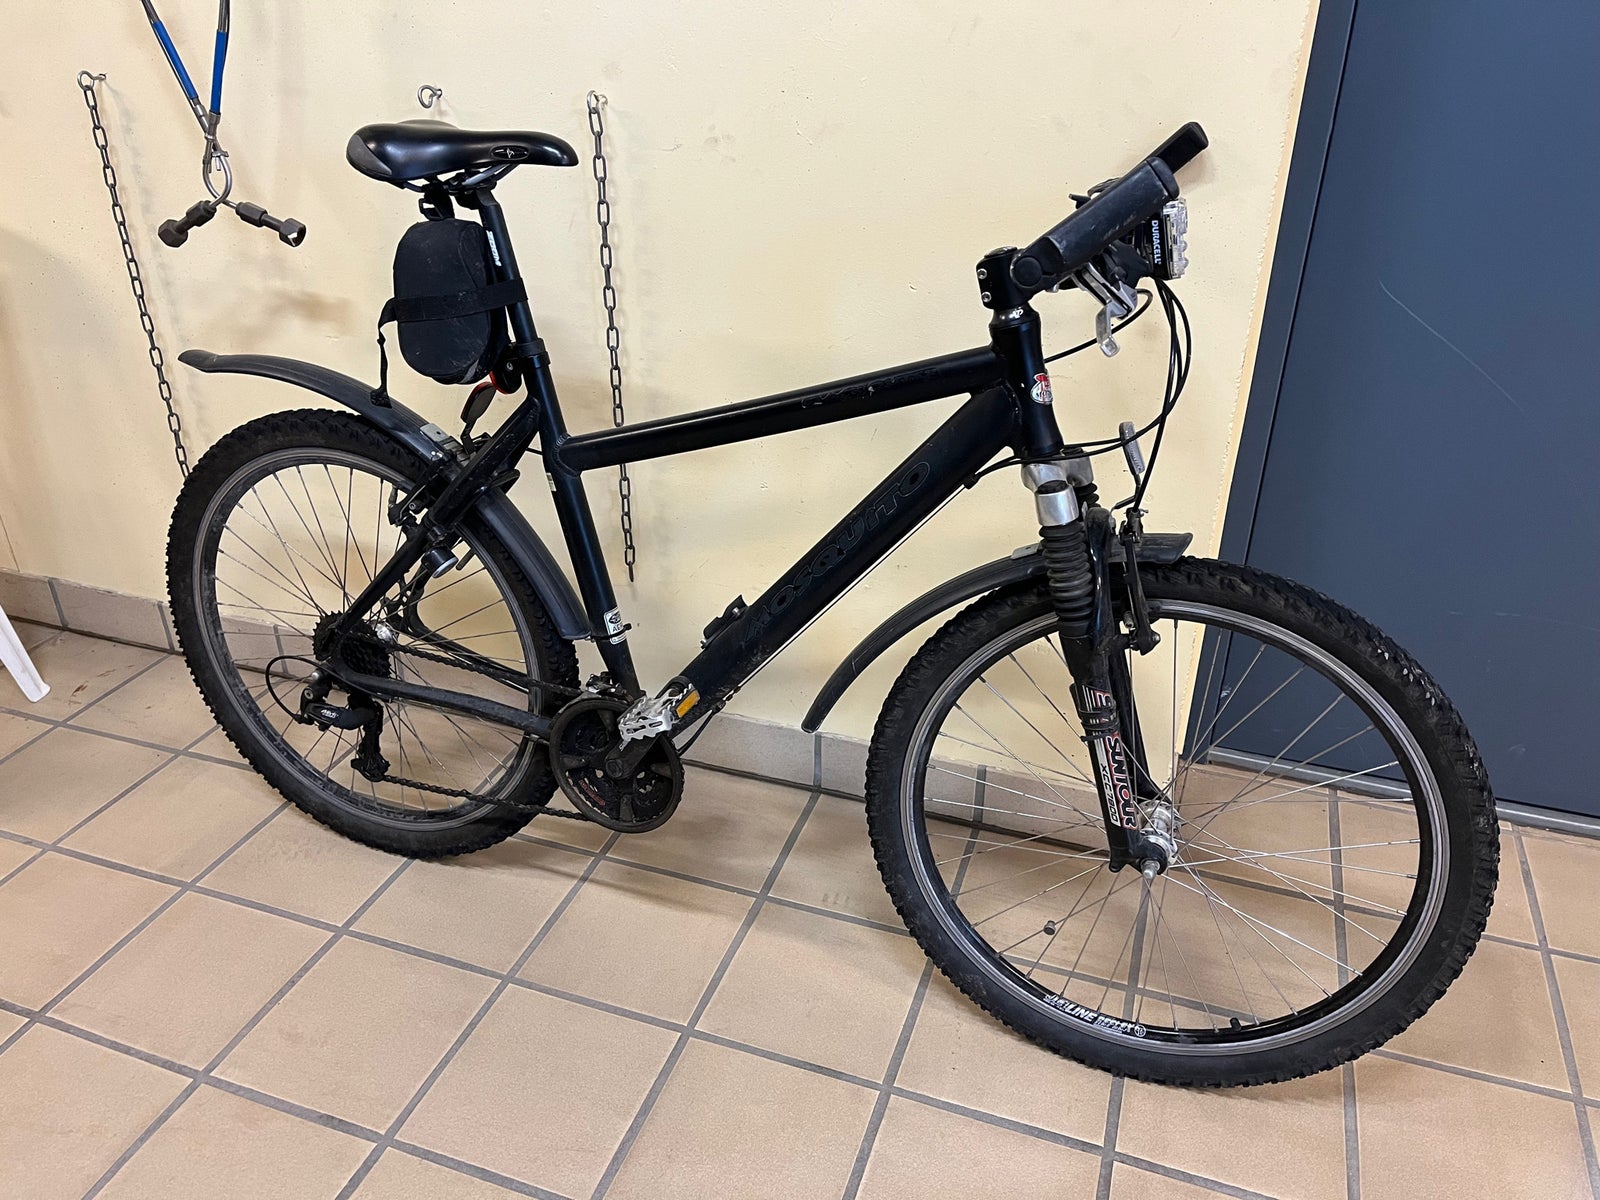 Mosquito Black Outer, anden mountainbike, 24 gear